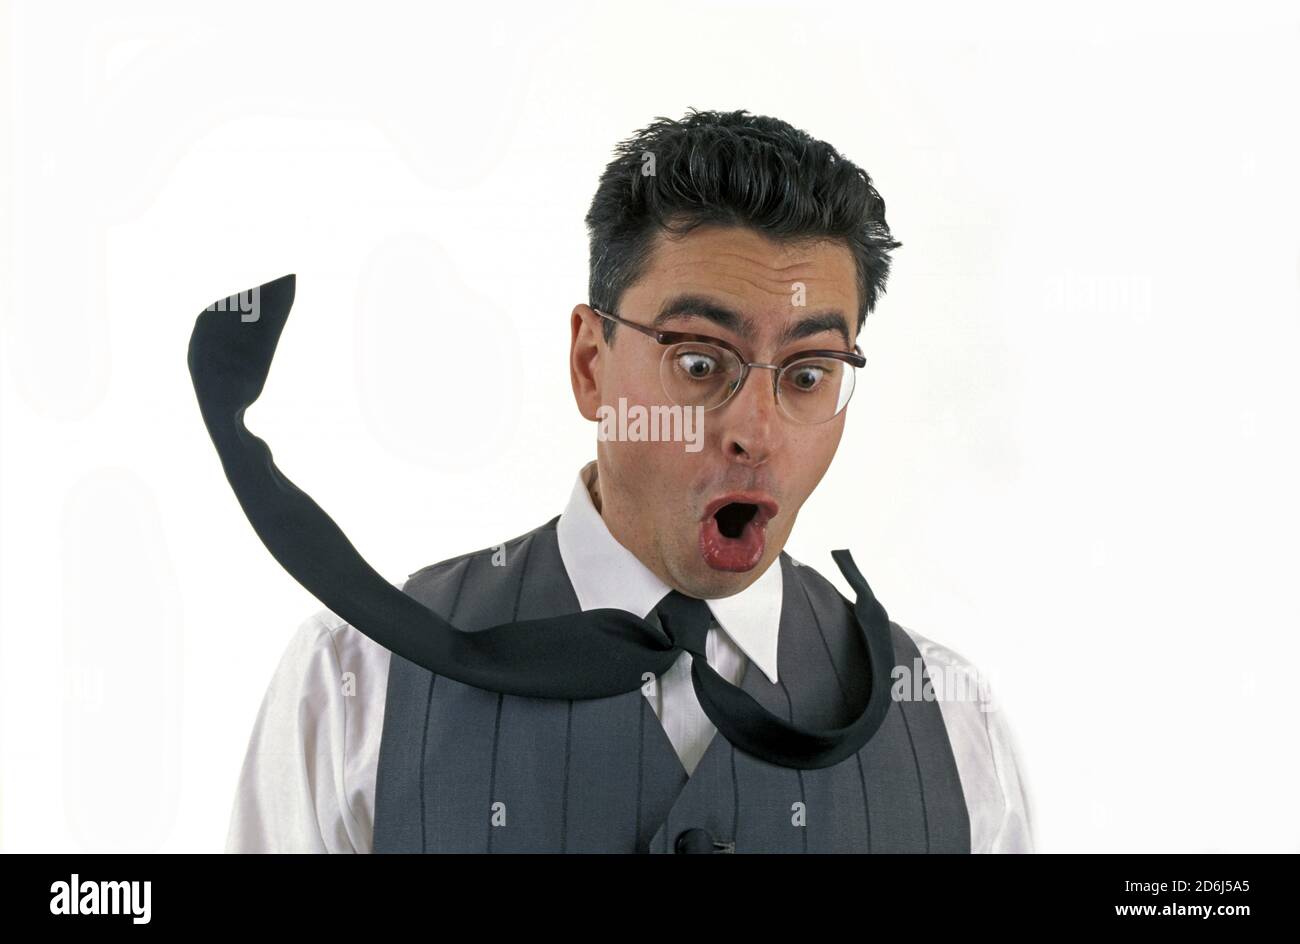 Man, Surprise, Tie blows up, Berlin, Germany Stock Photo